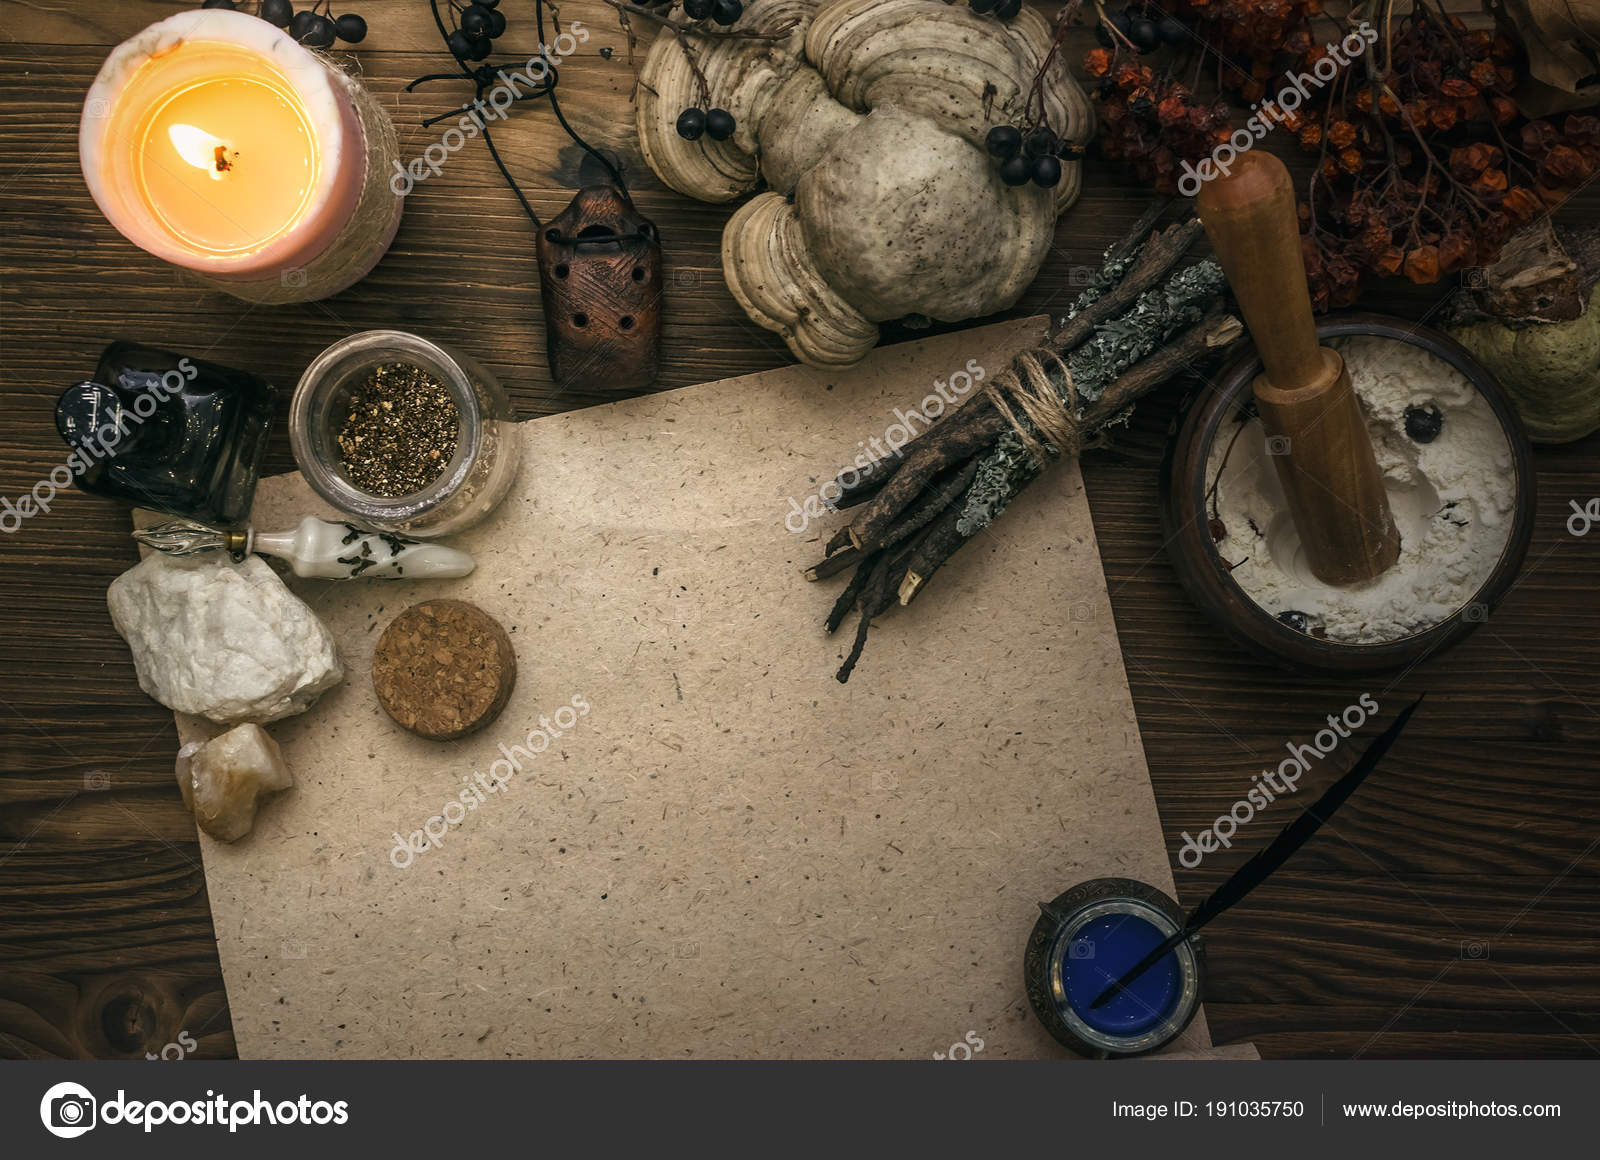 Witchcraft background with copy space. Magic potions and dried herbs on a  witch doctor table. Stock Photo